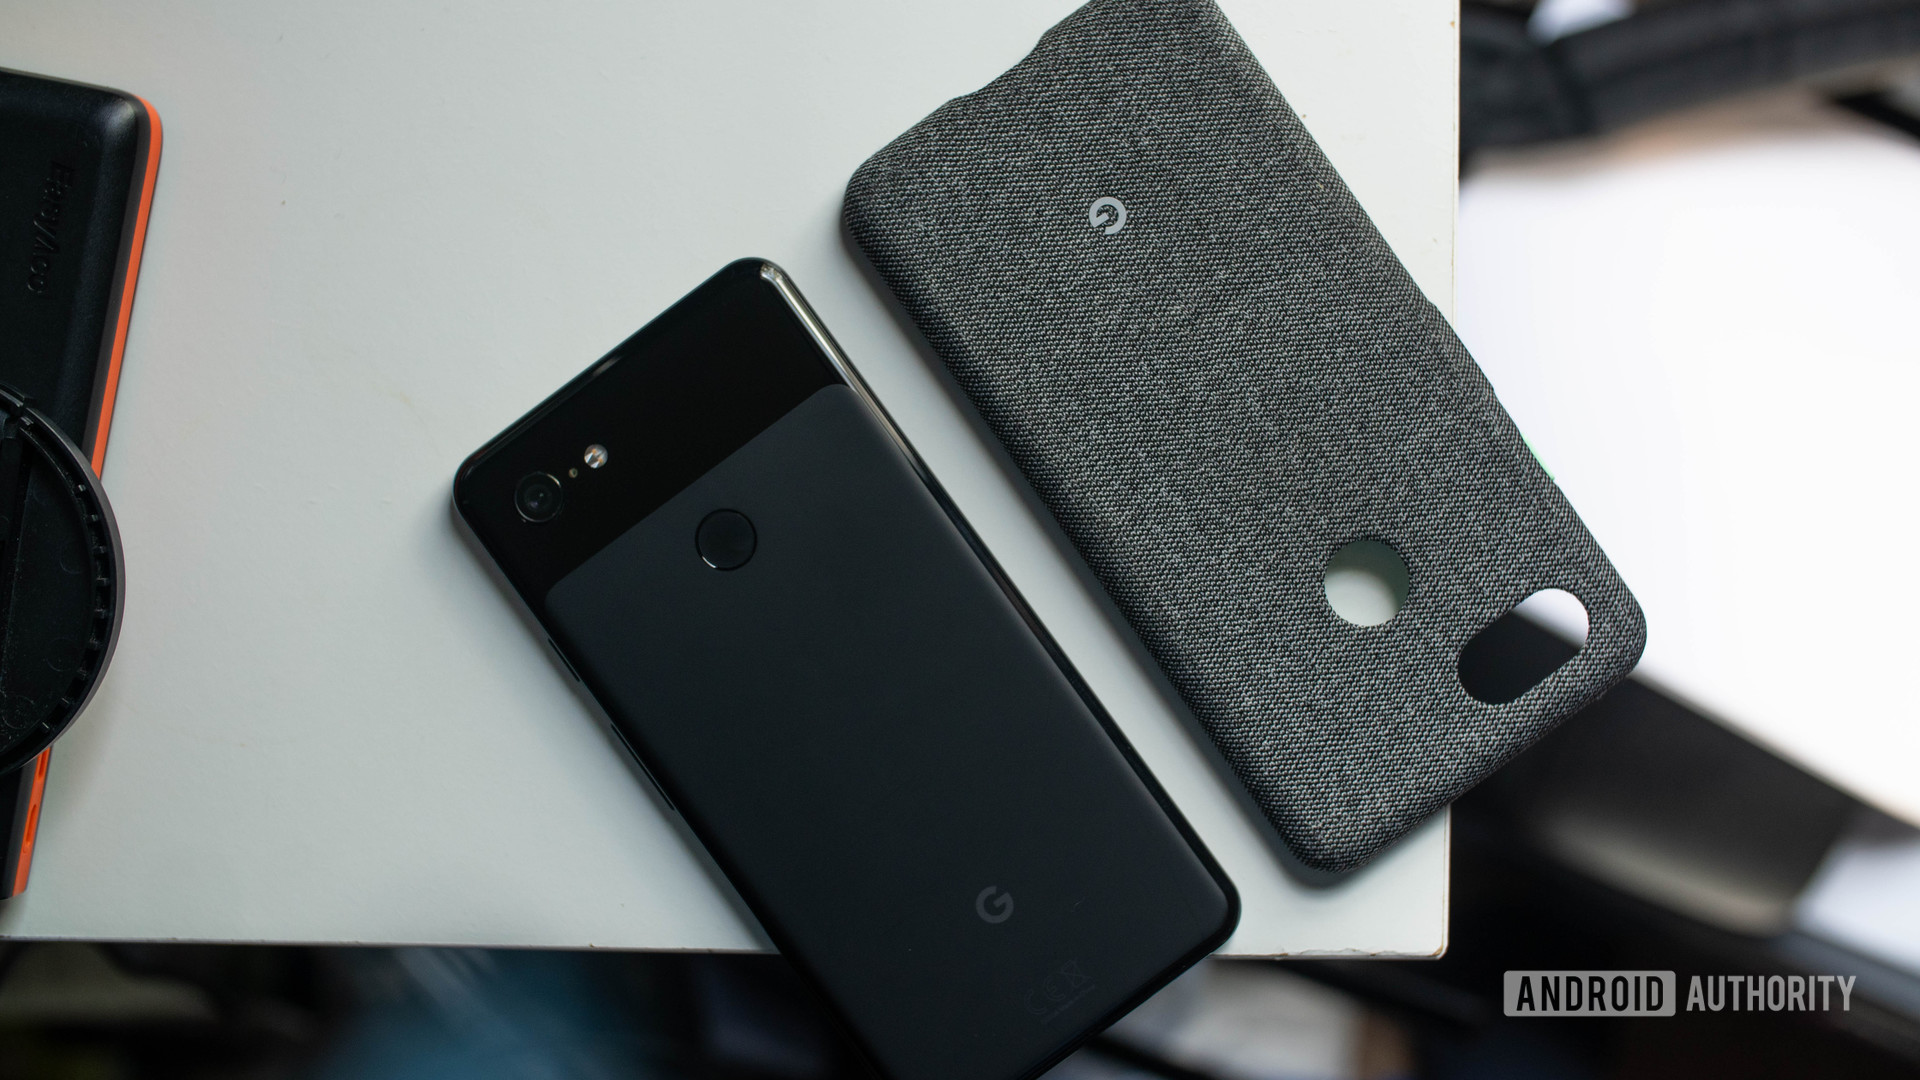 Pixel 3 XL product photo flat lay with case on angle